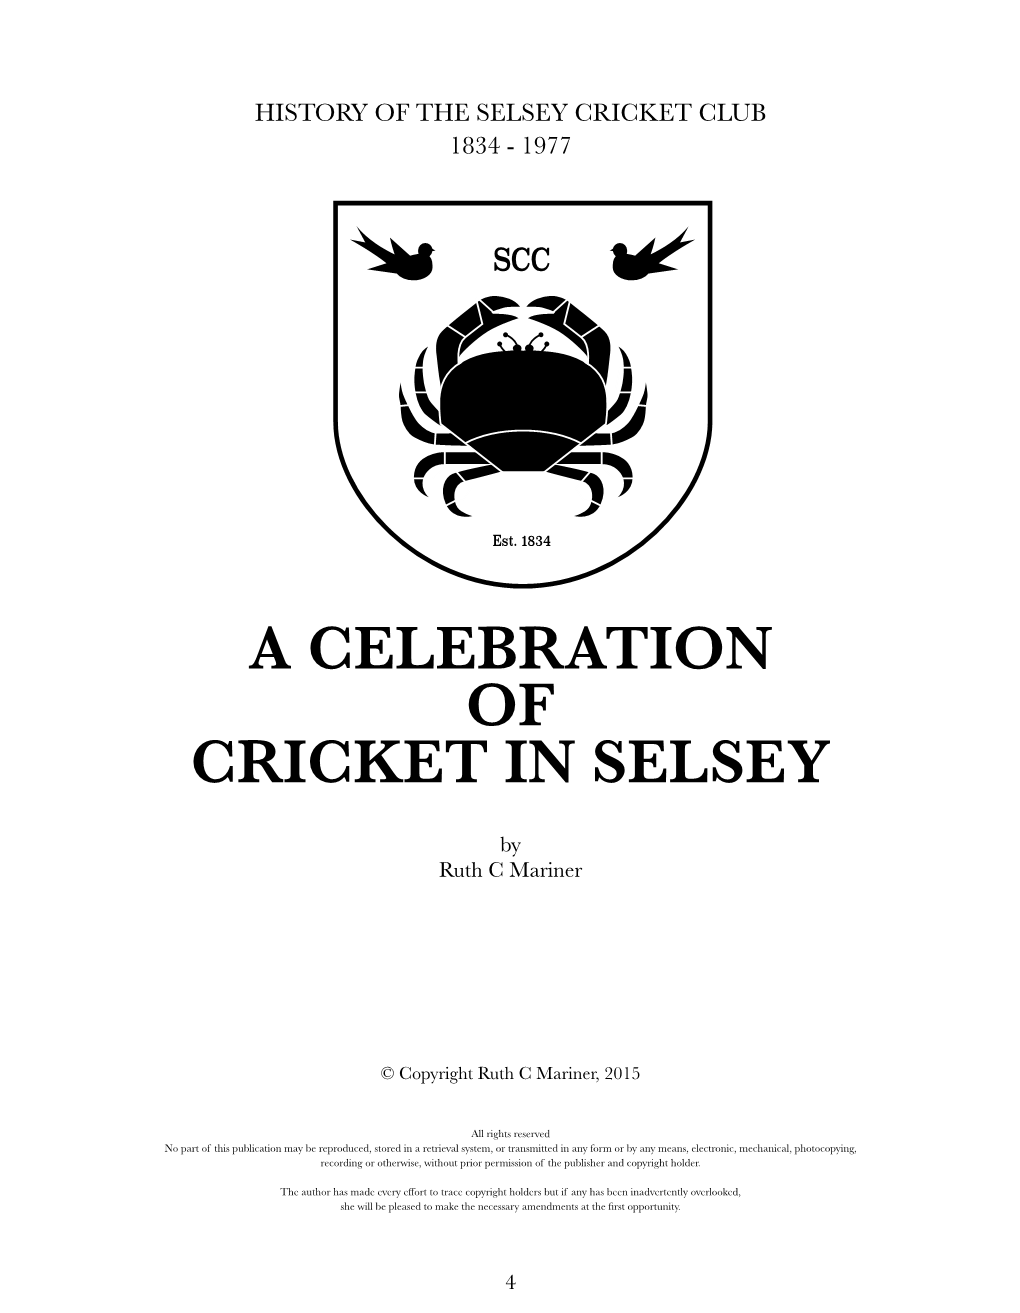 A Celebration of Cricket in Selsey